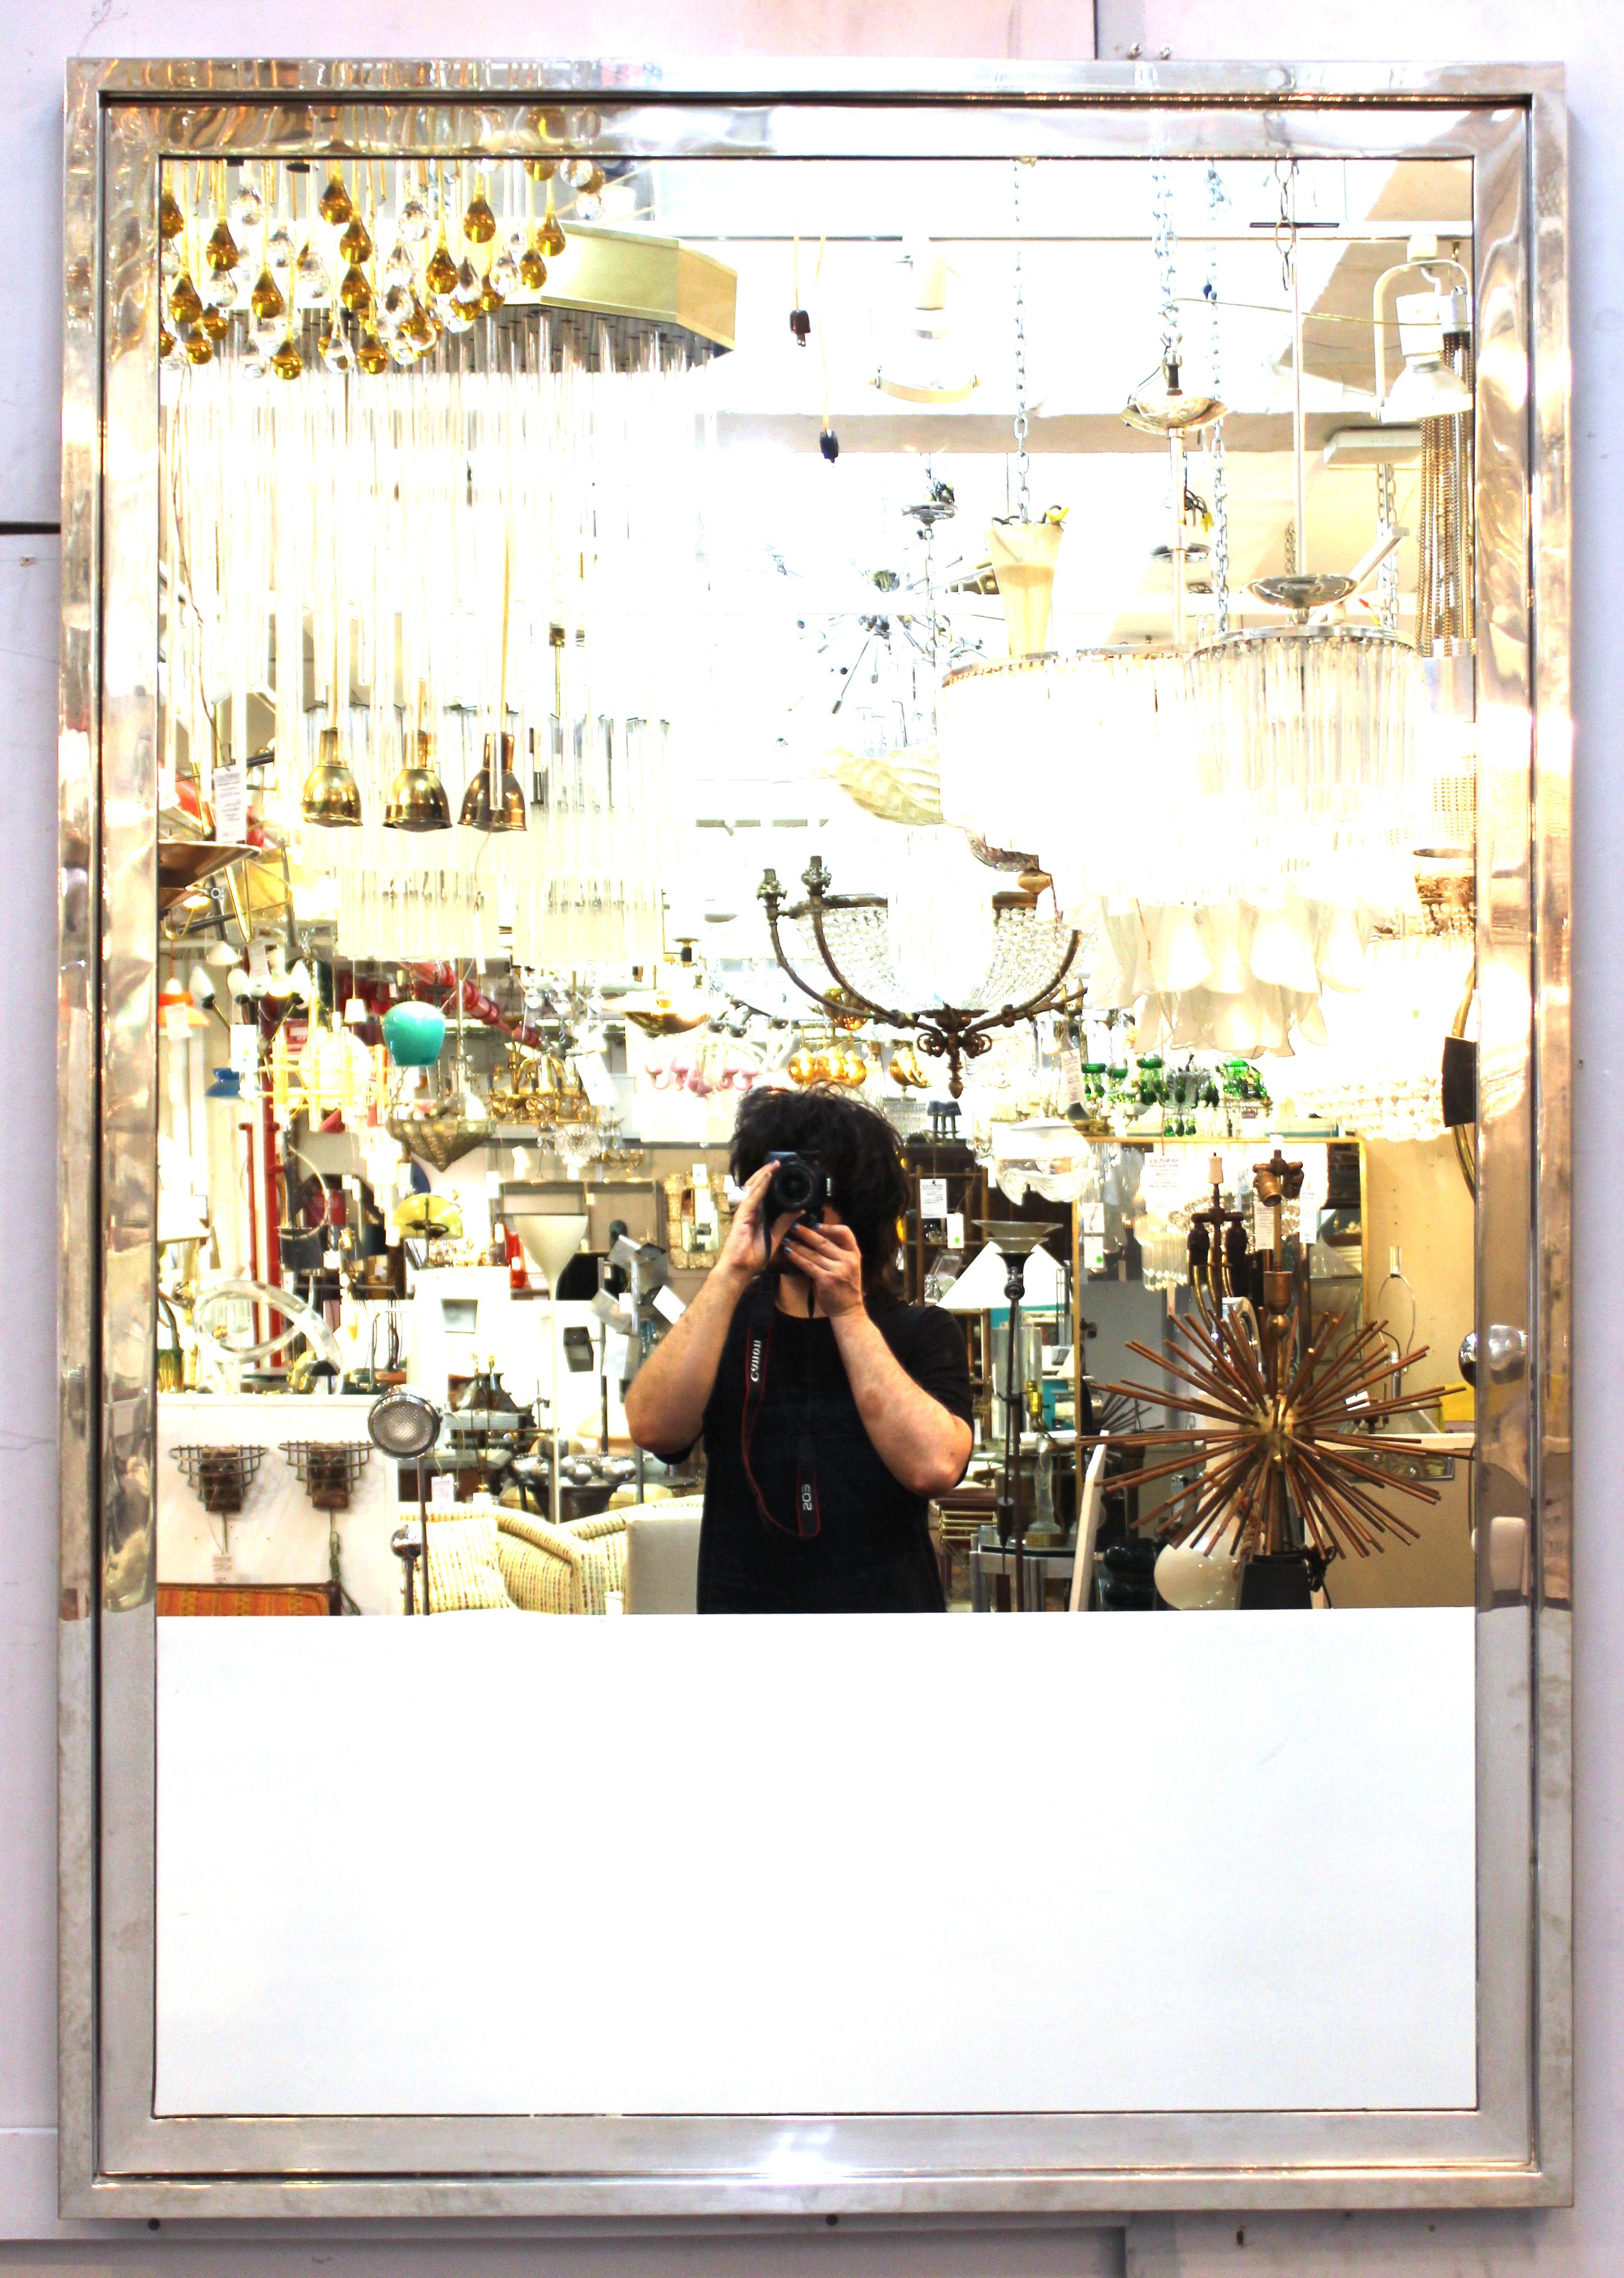 Modern chromed metal frame wall mirror by Pace collection, made during the mid-to late 20th century. A pace mark is on the back frame. The piece is in great vintage condition with age-appropriate wear.